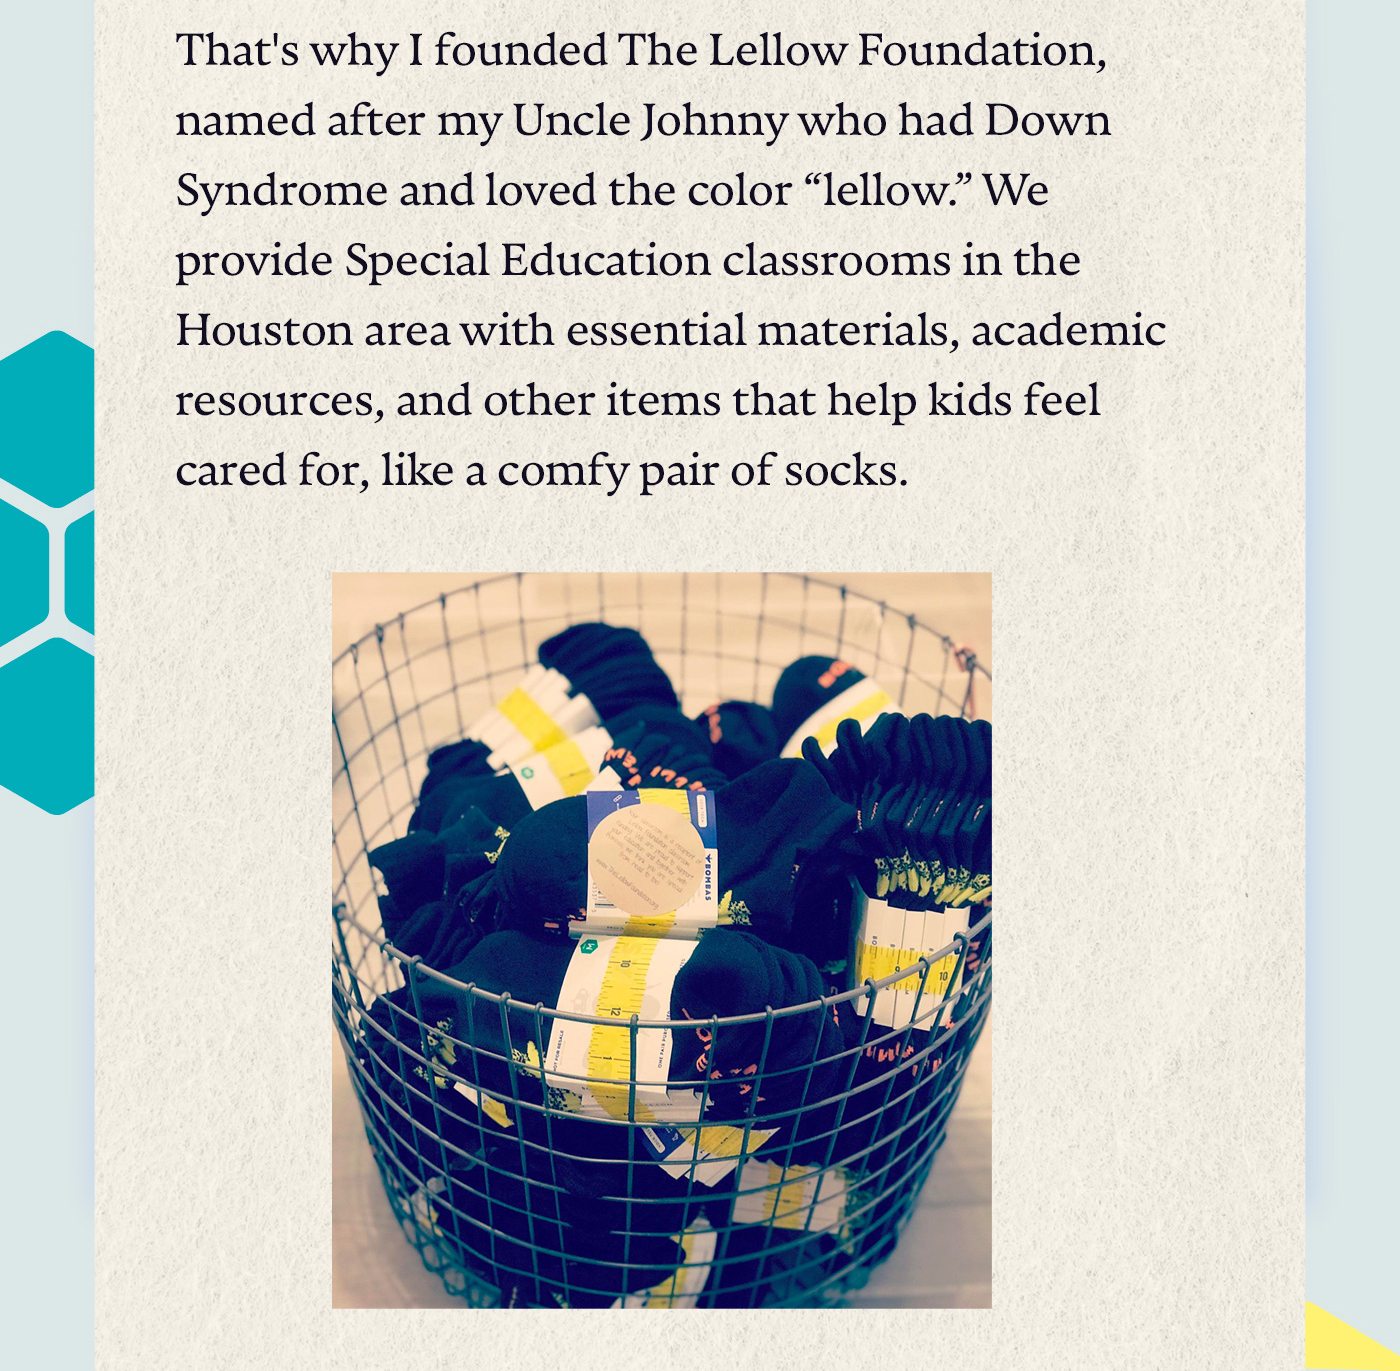 That's why I founded The Lellow Foundation, named after my Uncle Johnny who had Down Syndrome and loved the color, “lellow.” We provide Special Education classrooms in the Houston area with essential materials, academic resources, and other items that help kids feel cared for, like a comfy pair of socks.